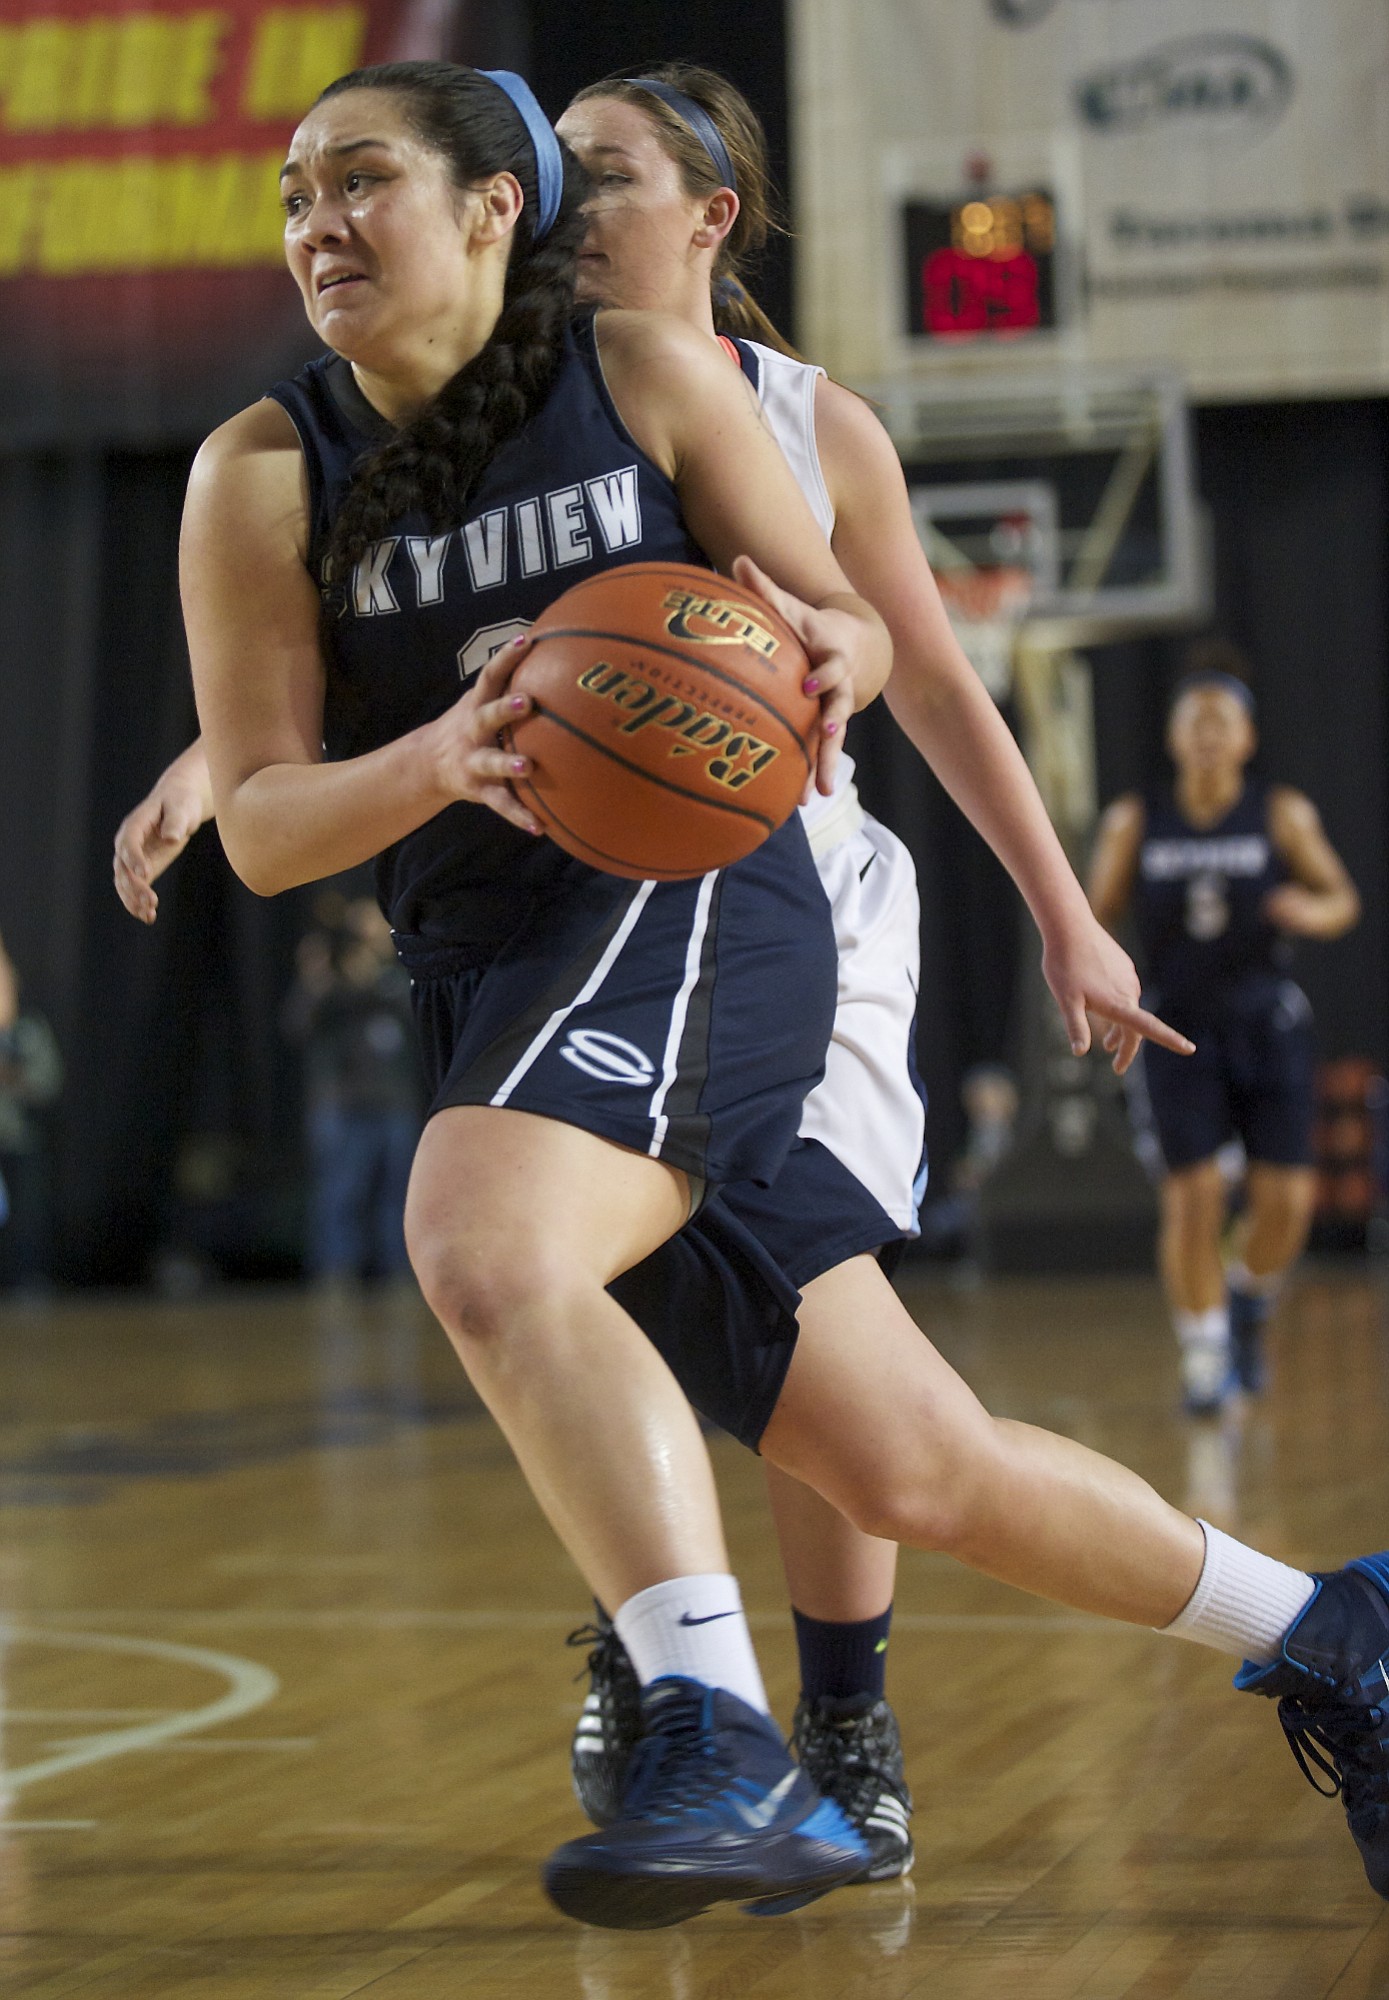 Skyview's Stephanie McDonagh drives to the hoop against Gonzaga Prep during the first half of an opening round game in the Class 4A state tournament at the Tacoma Dome on Thursday March 6, 2014.